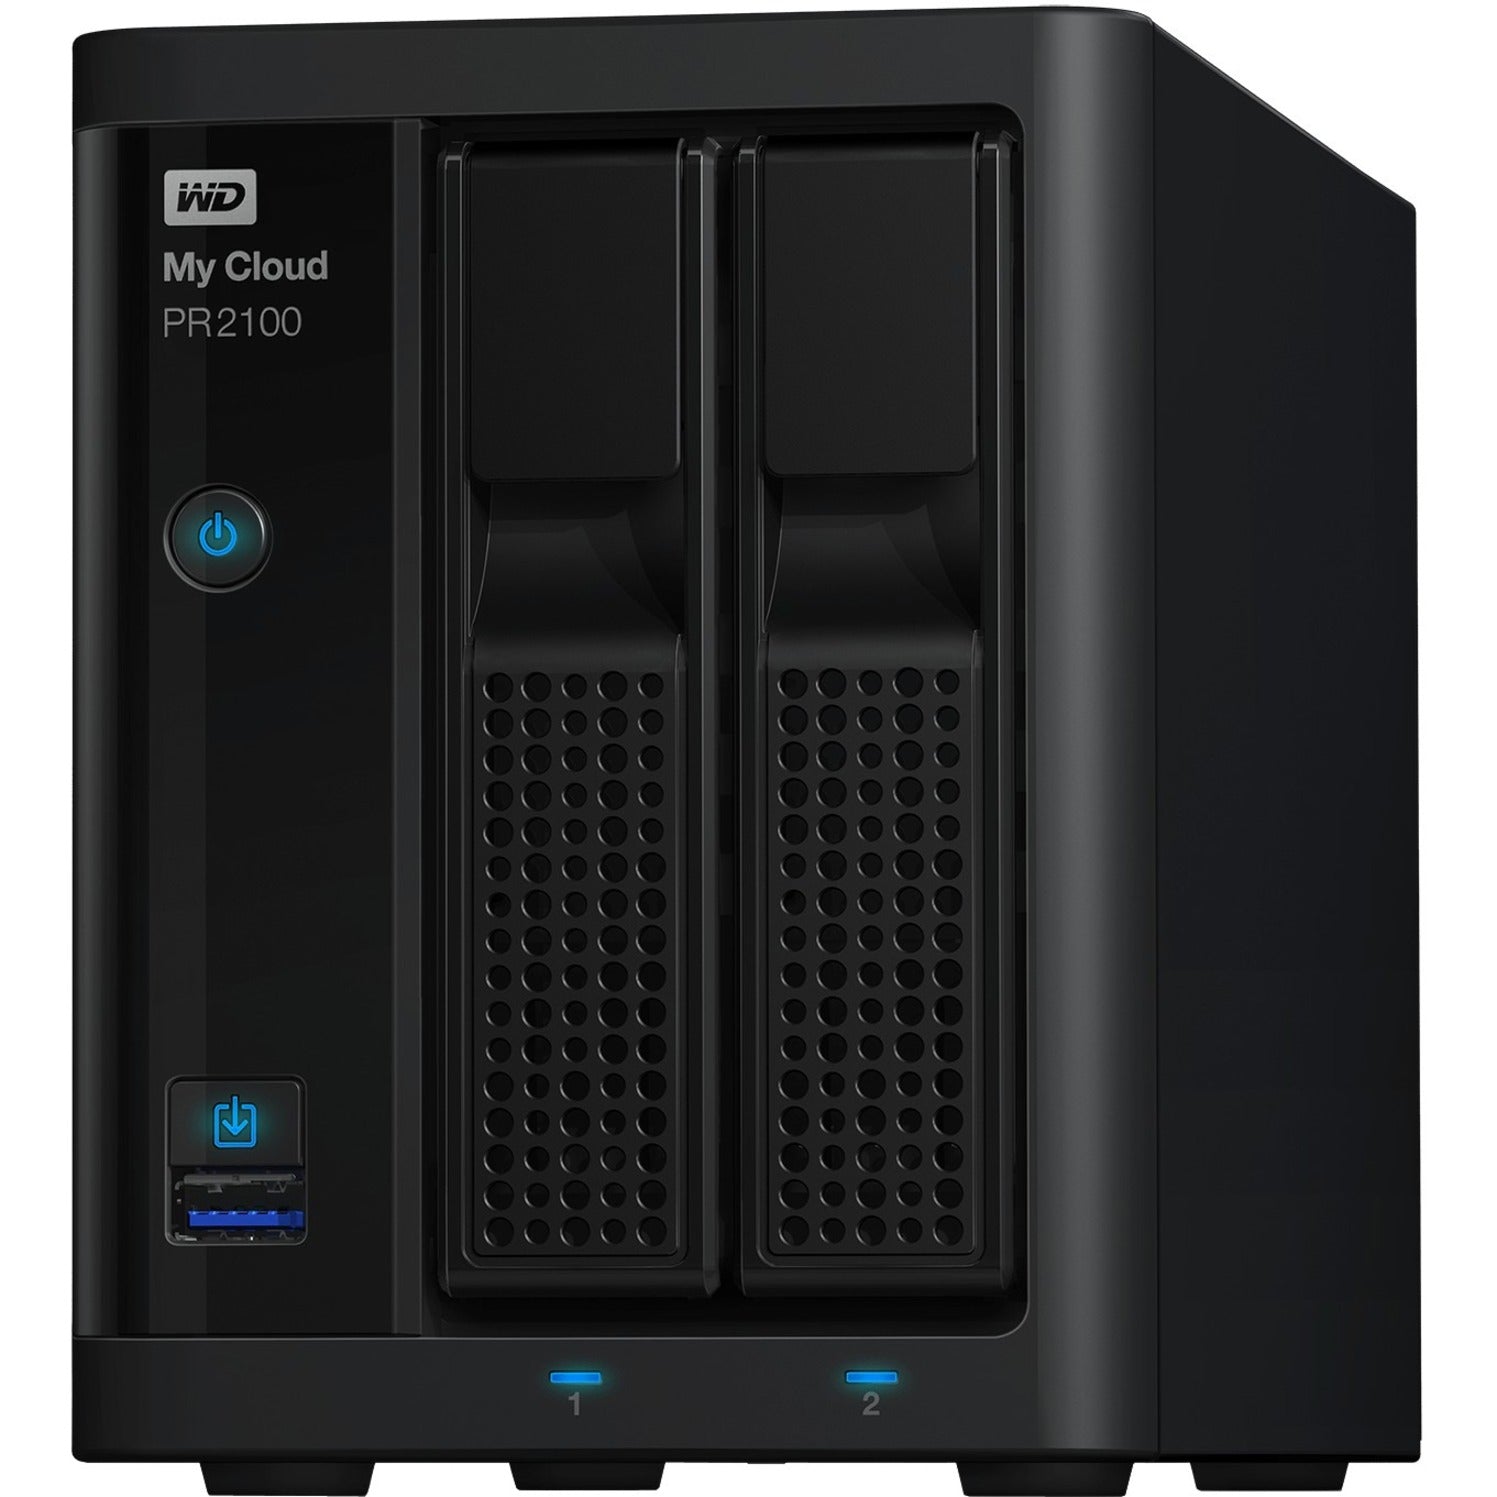 WD 20TB My Cloud Pro Series PR2100 Media Server with Transcoding, NAS - Network Attached Storage [Discontinued]